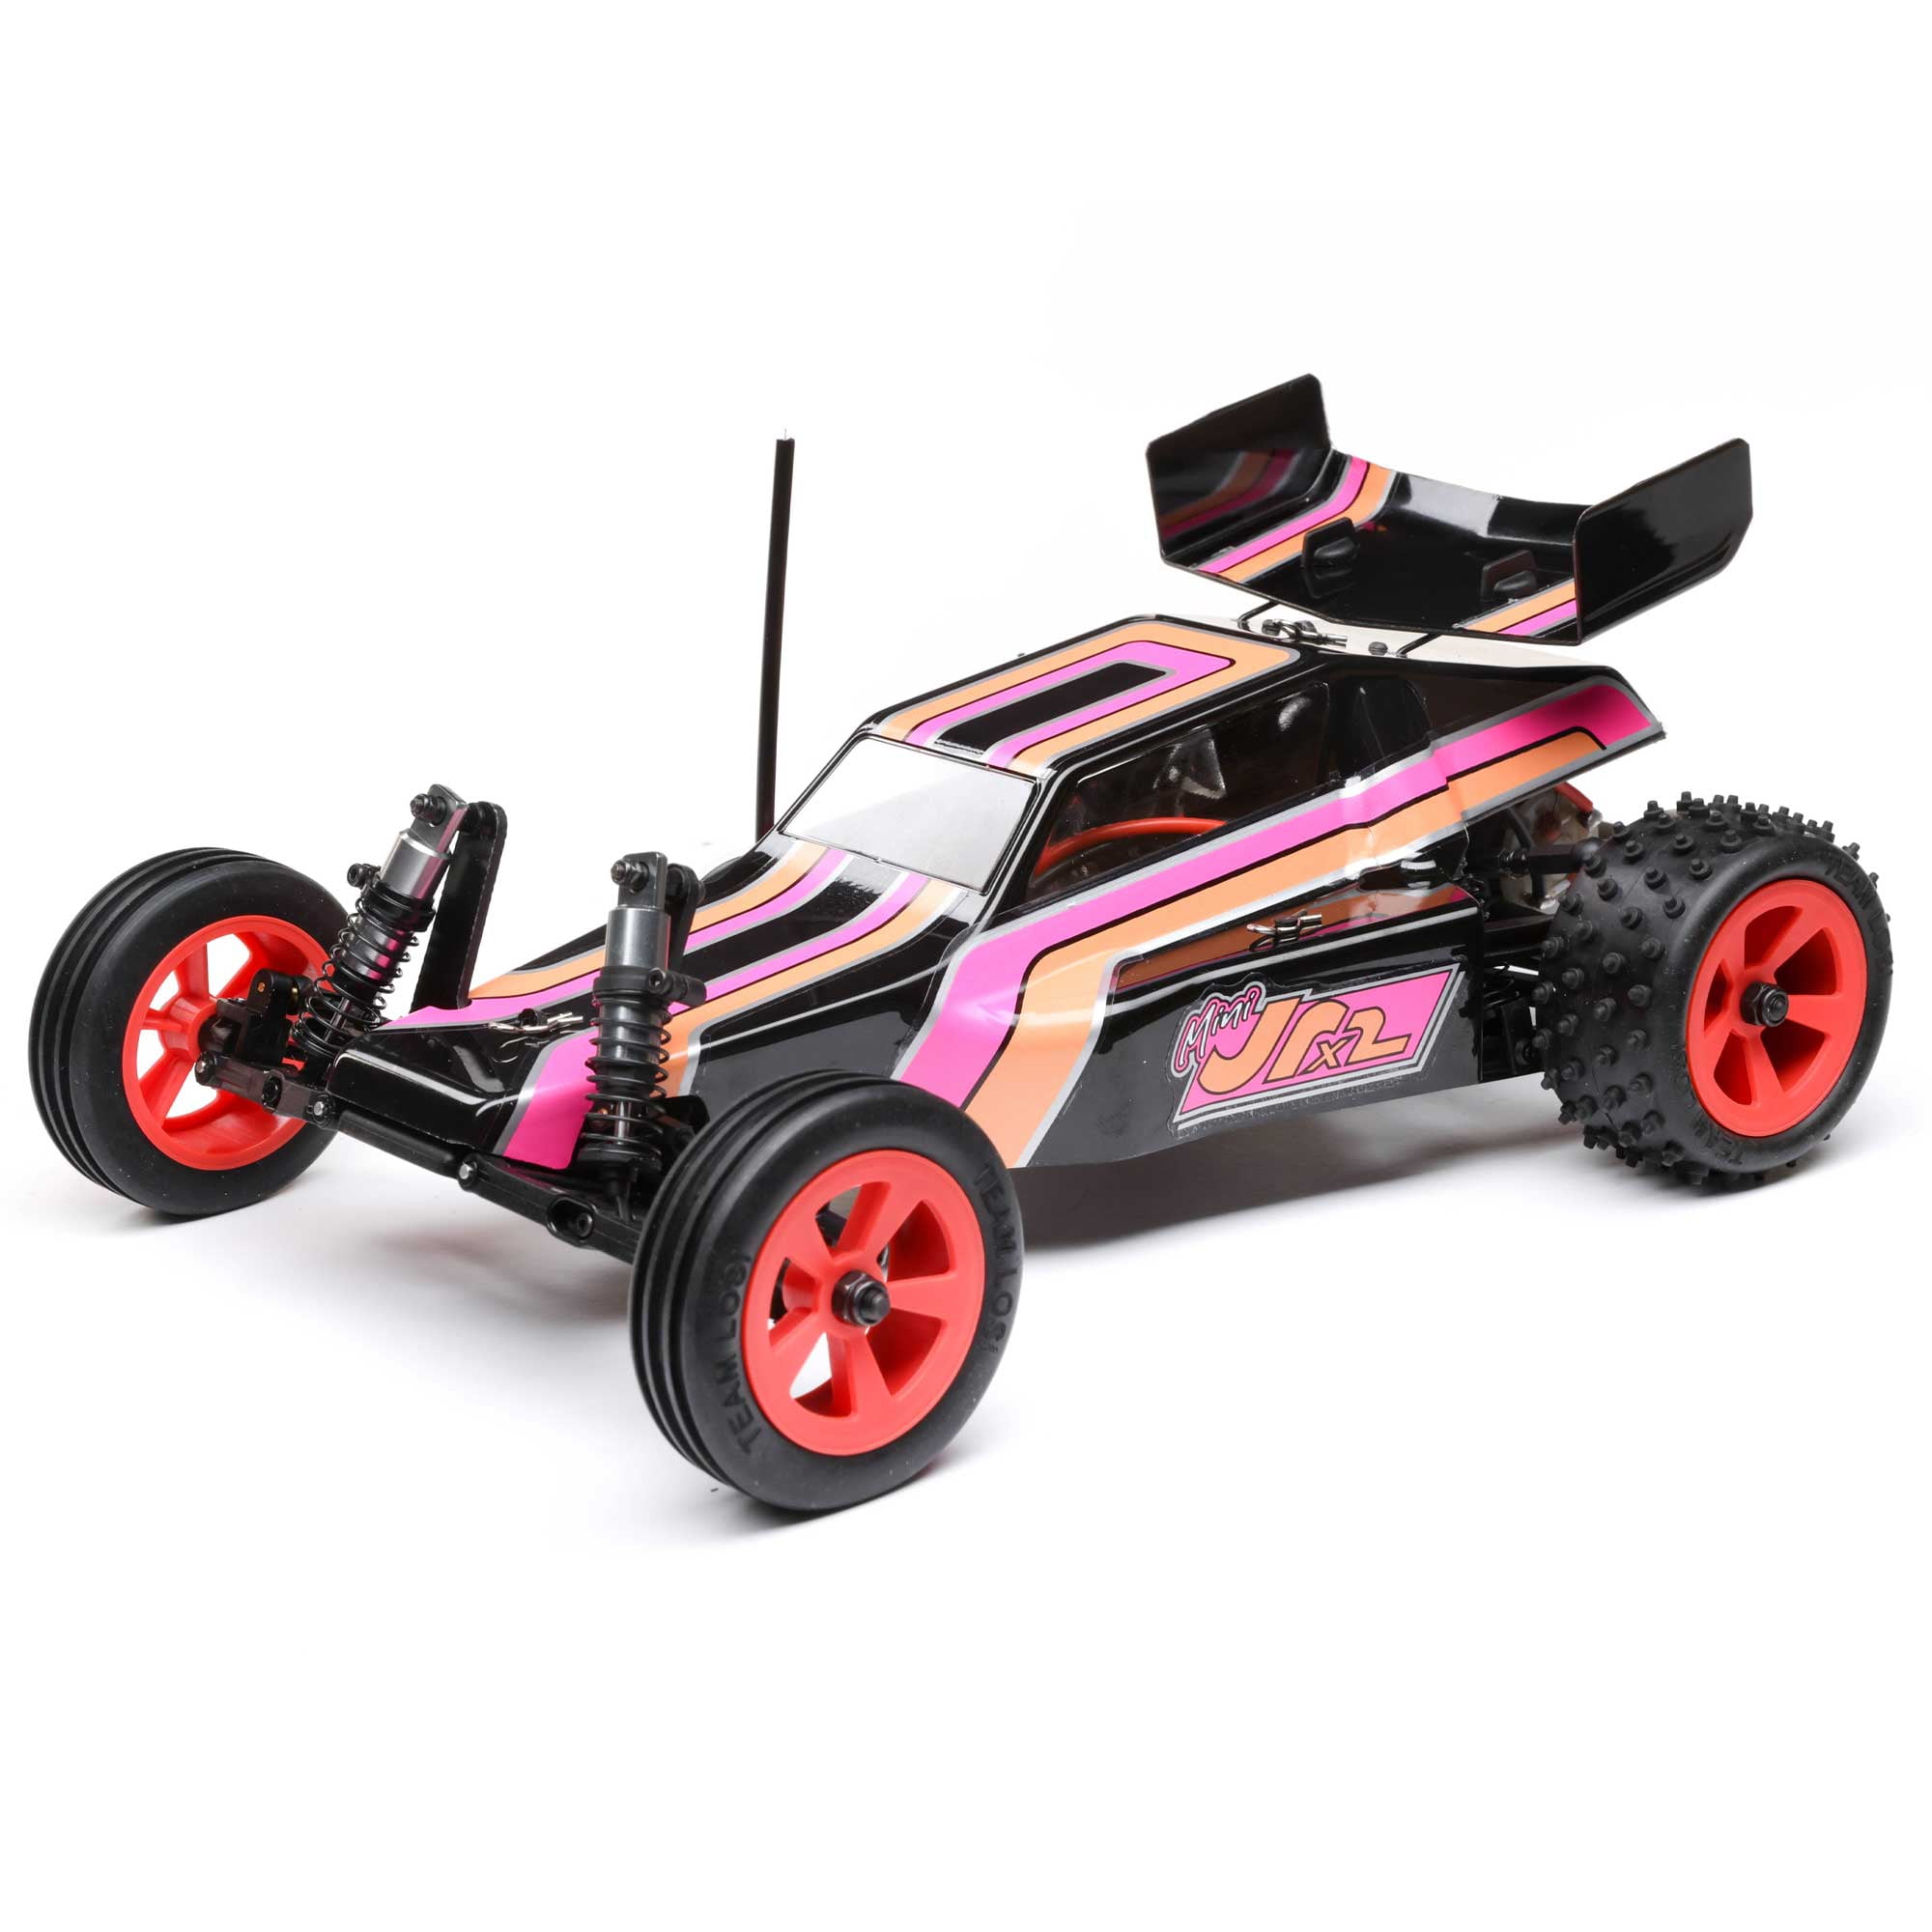 New Hot Wheels Mini RC Cars go 0-600 in One Second